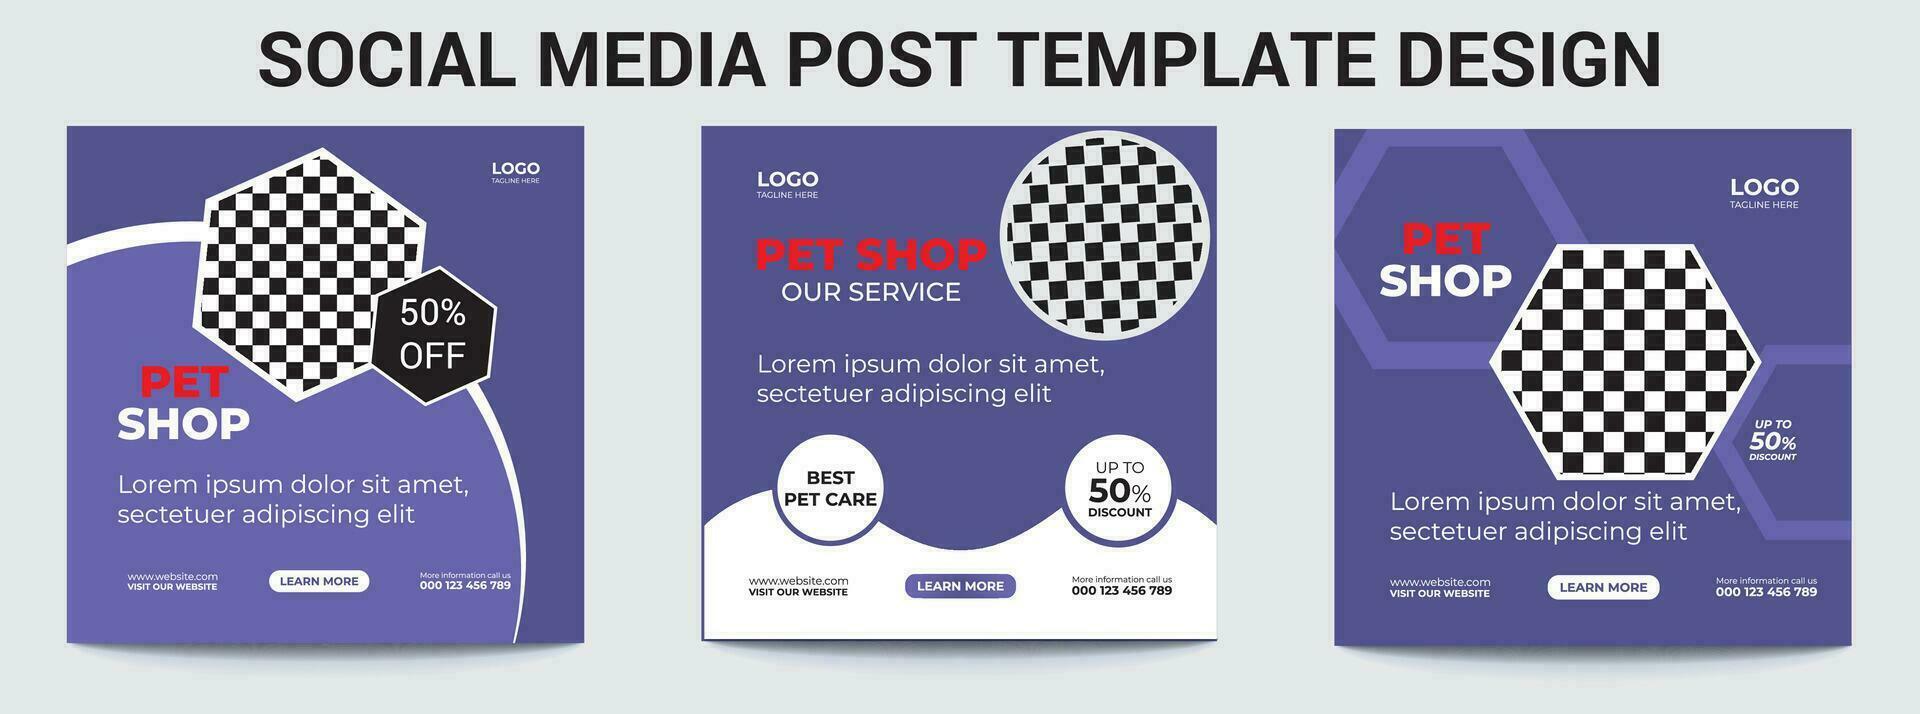 PPet shop banner for social media post and story templaterint vector